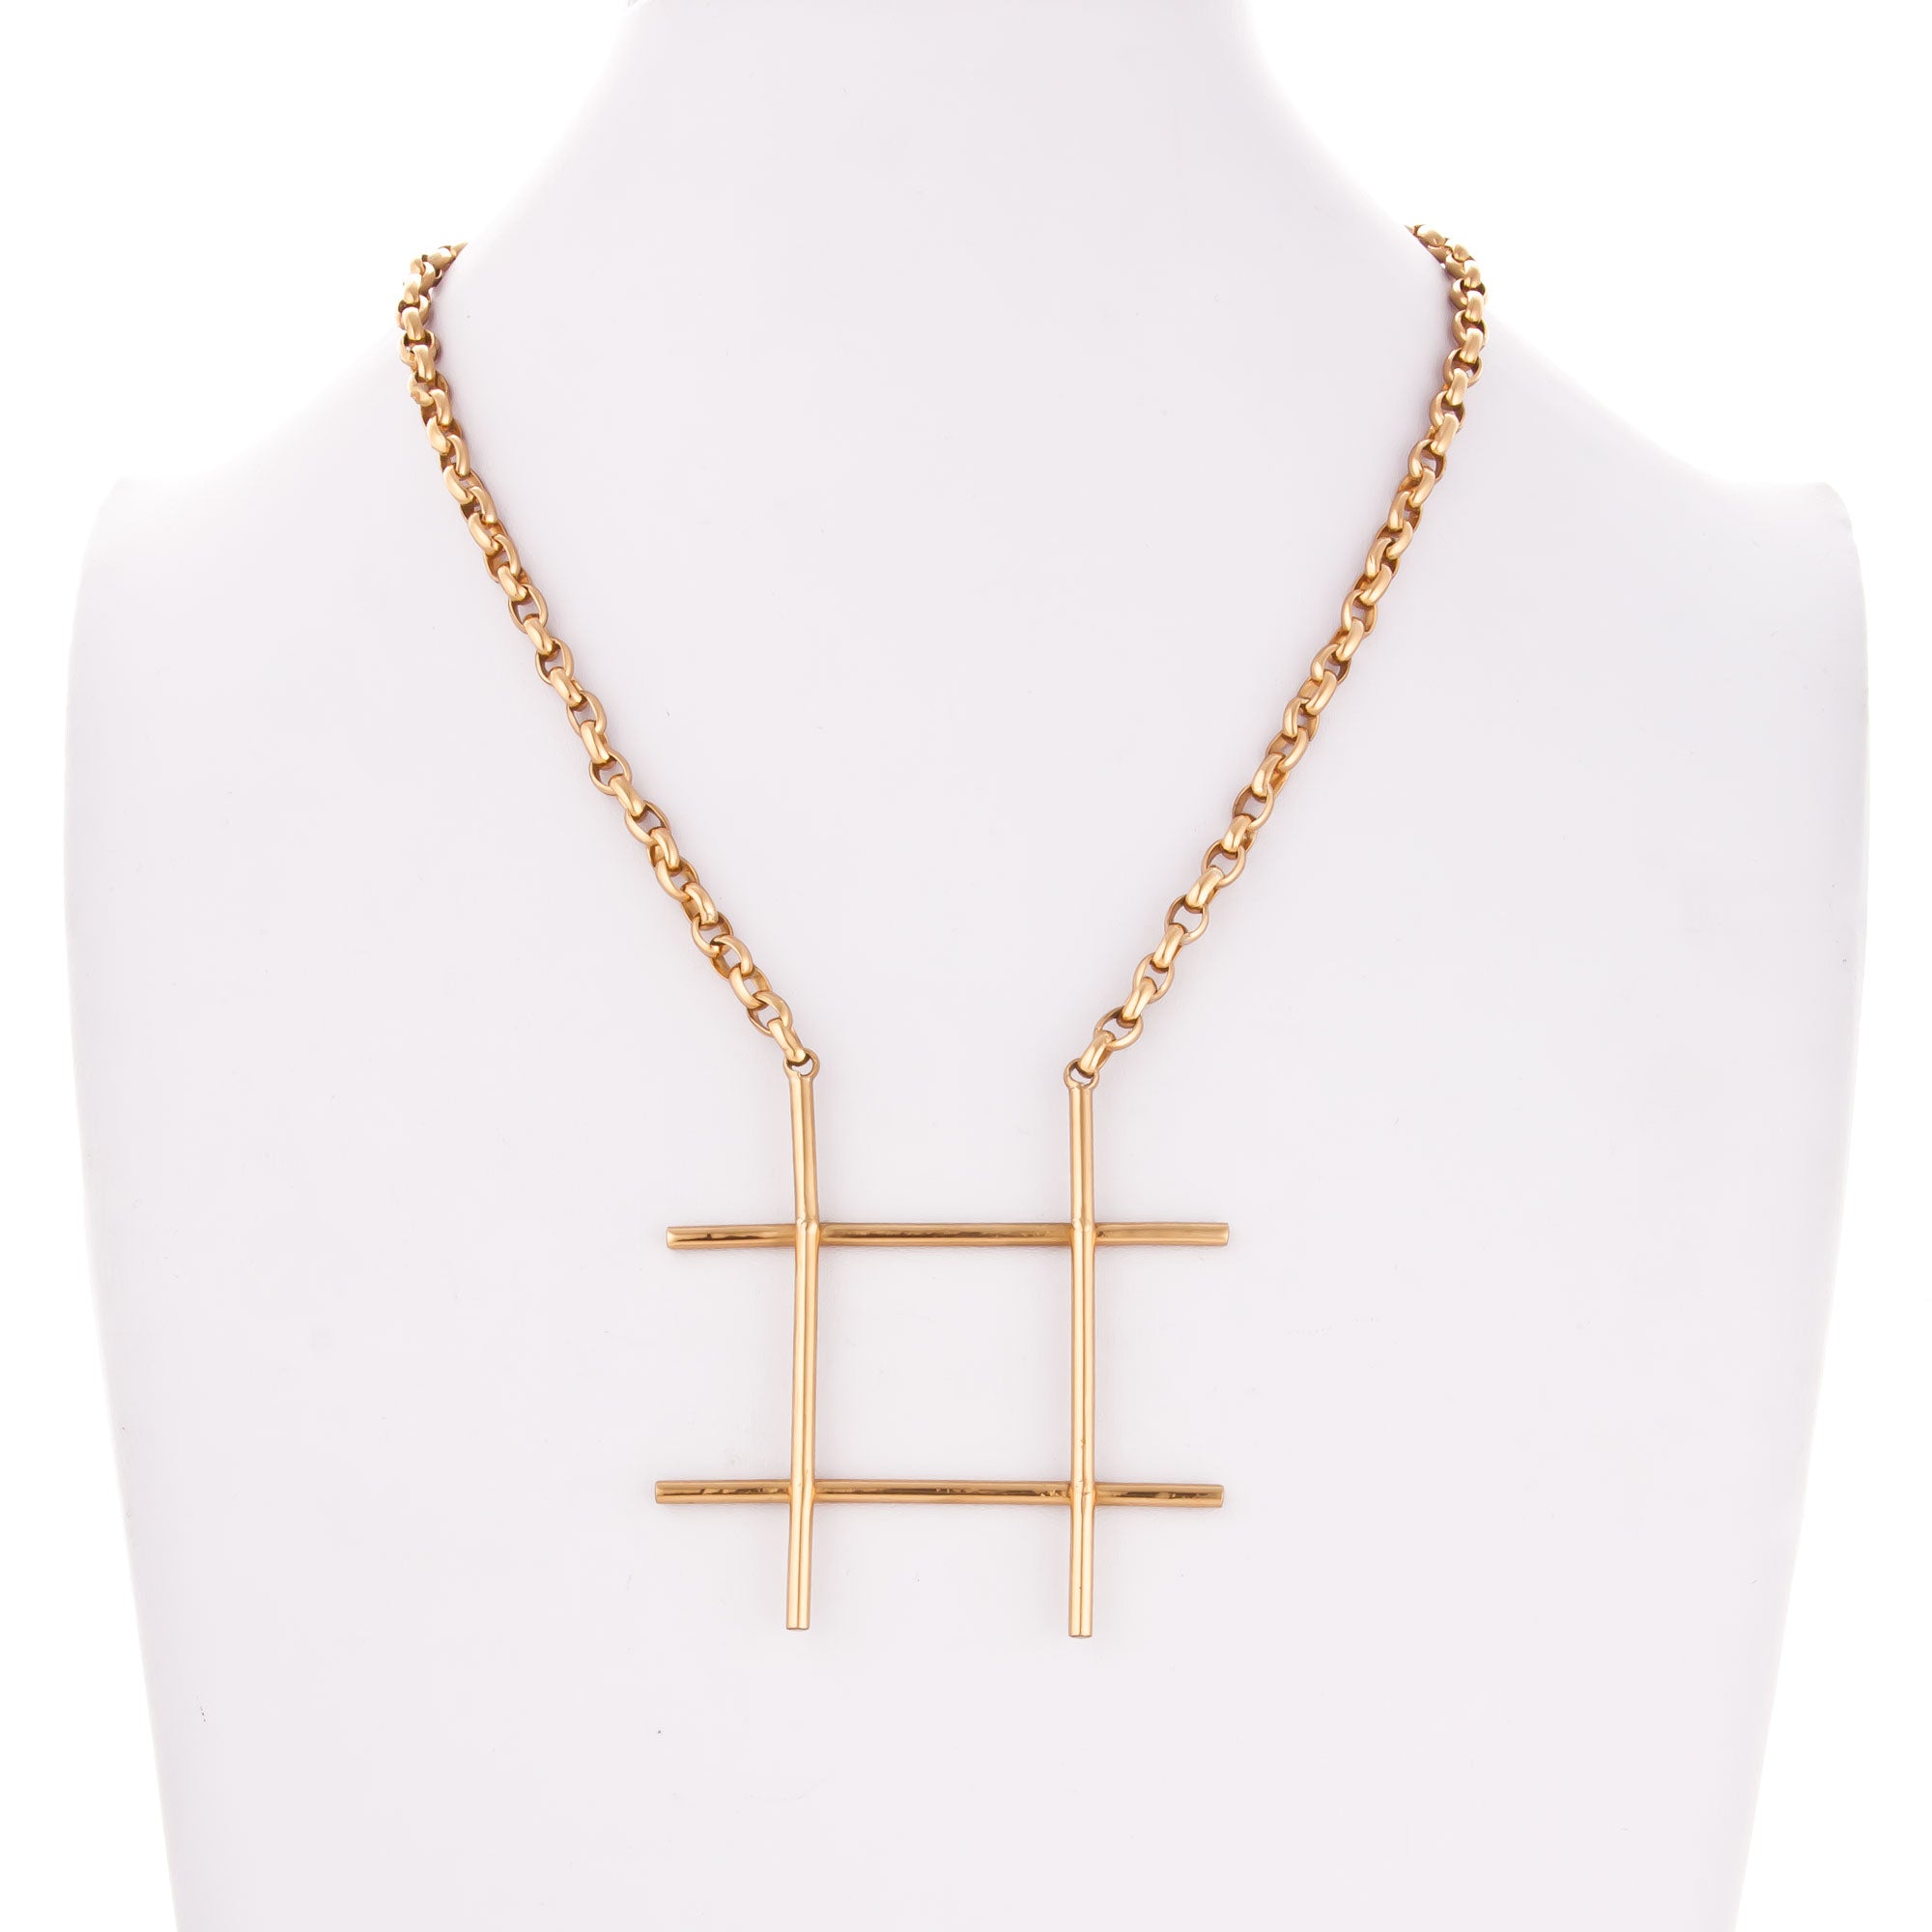 Charles Albert Jewelry - Alchemia # 'Hash Tag' Necklace